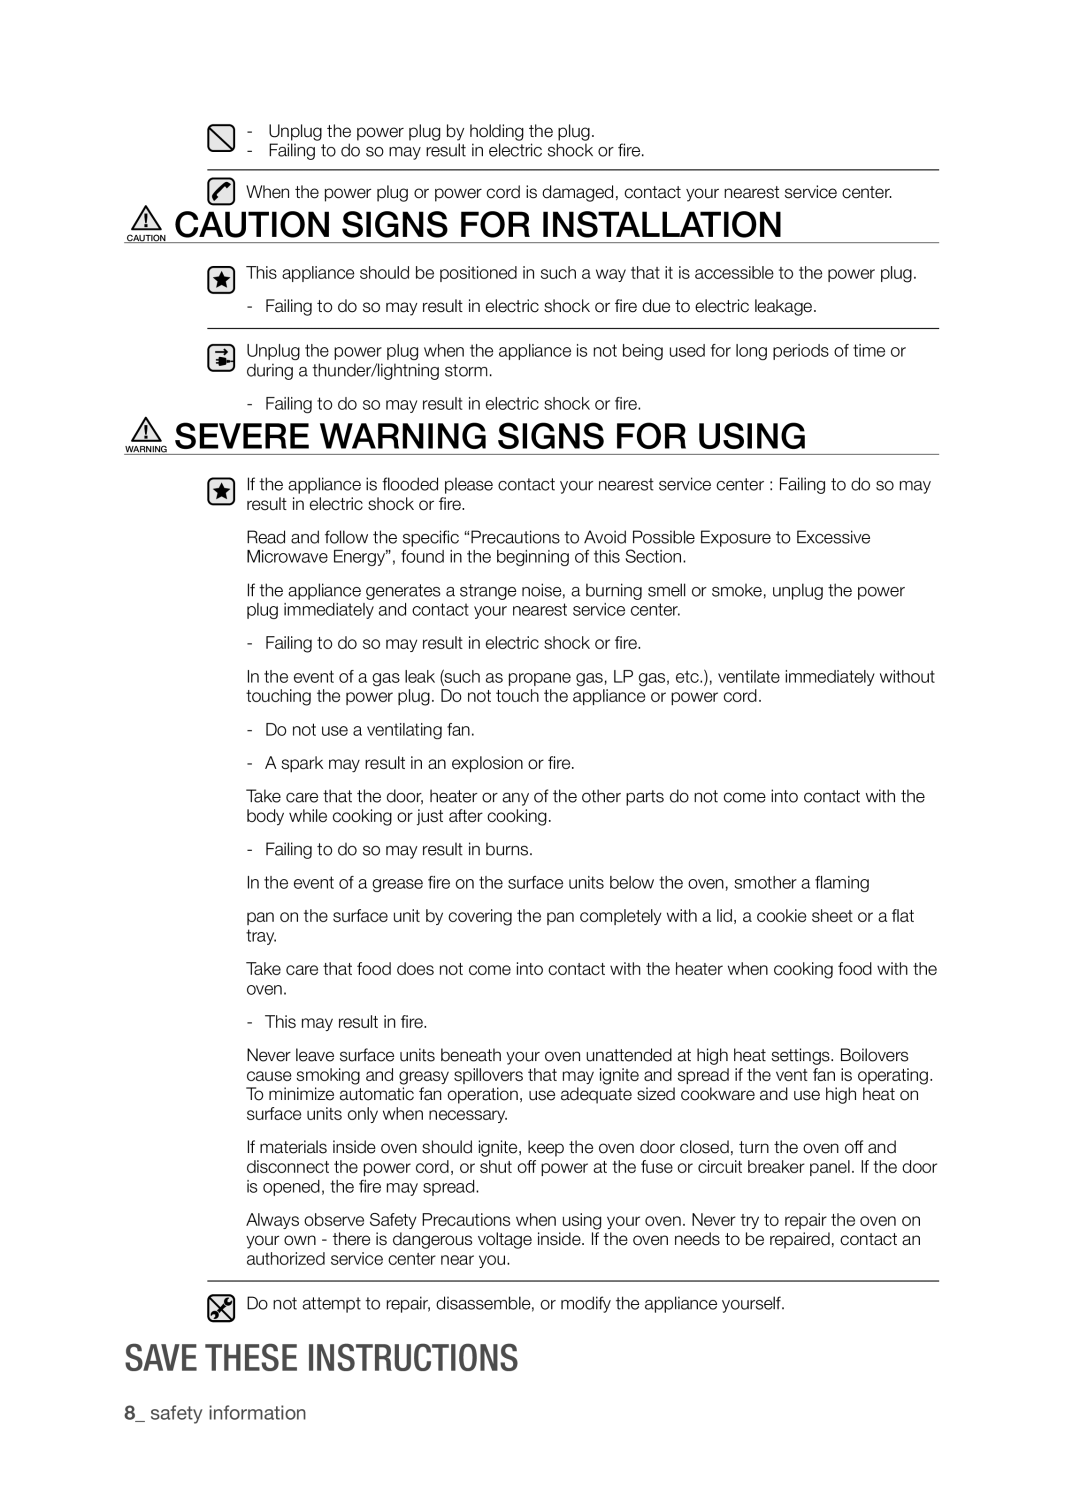 Samsung SMK9175ST Caution Caution Signs For Installation, Warning Severe Warning Signs For Using, Save these instructions 